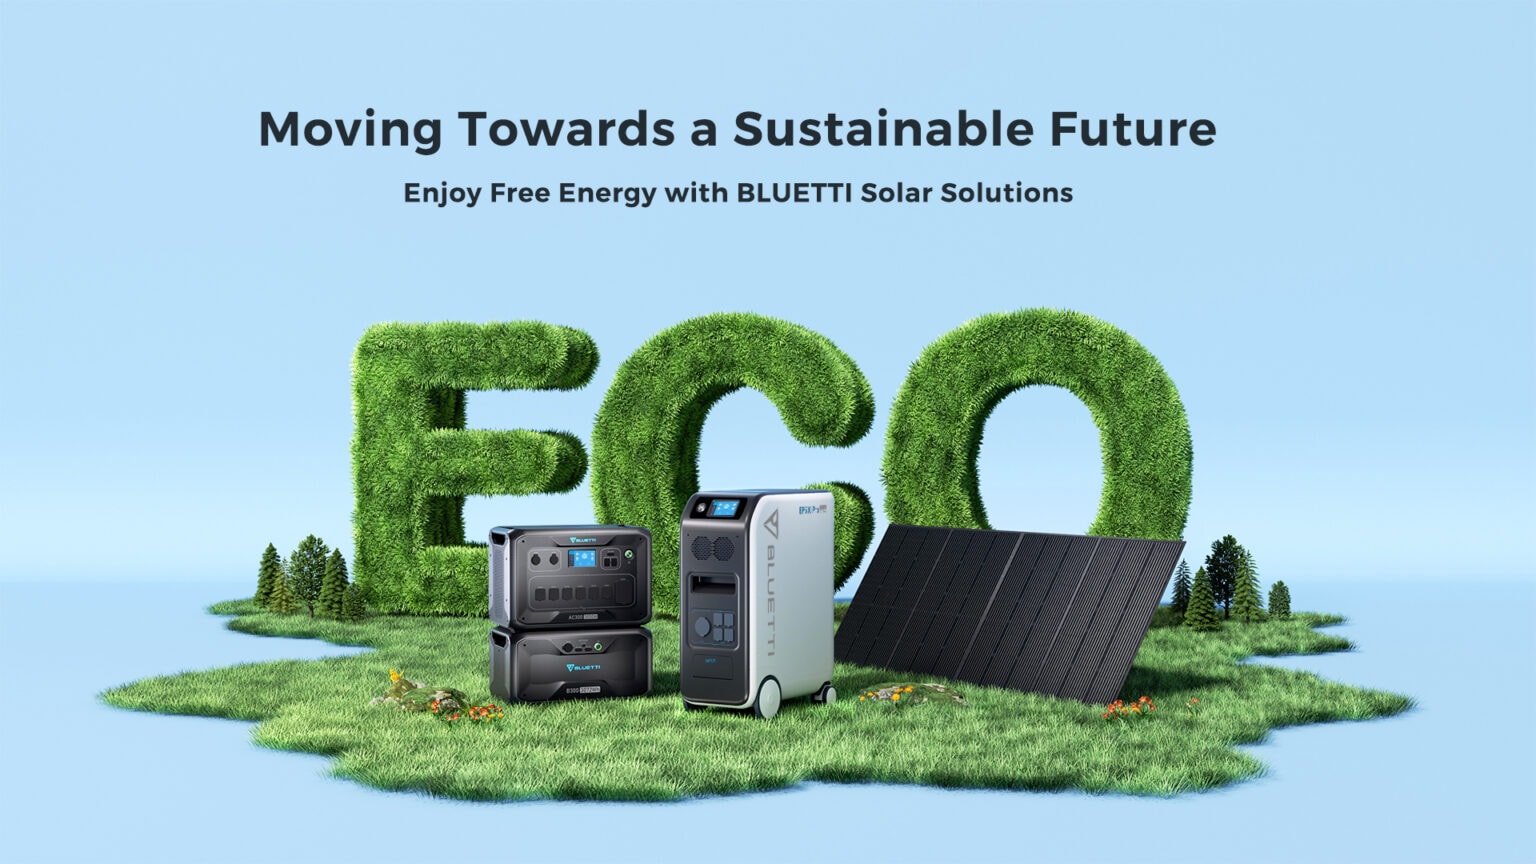 Bluetti offers solar-powered products and practical advice on living sustainably.